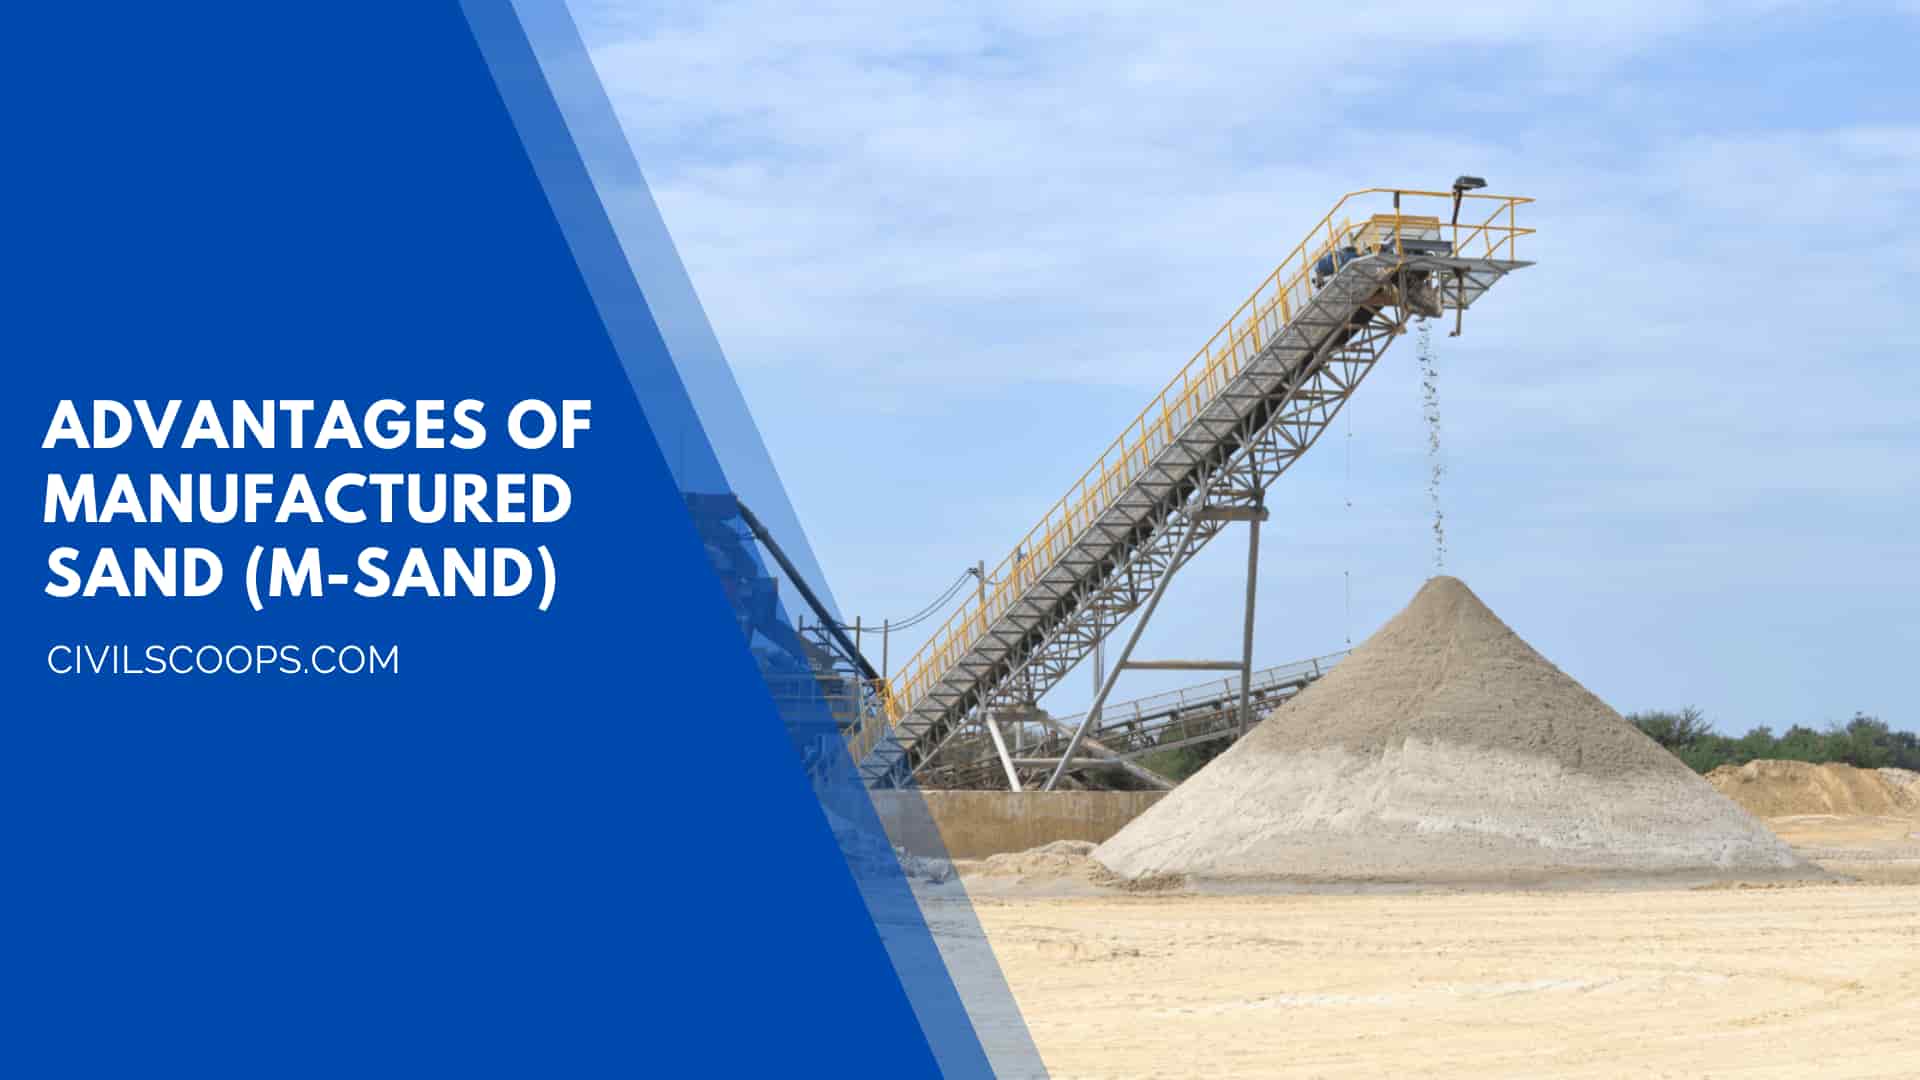 Advantages of Manufactured Sand (M-Sand)